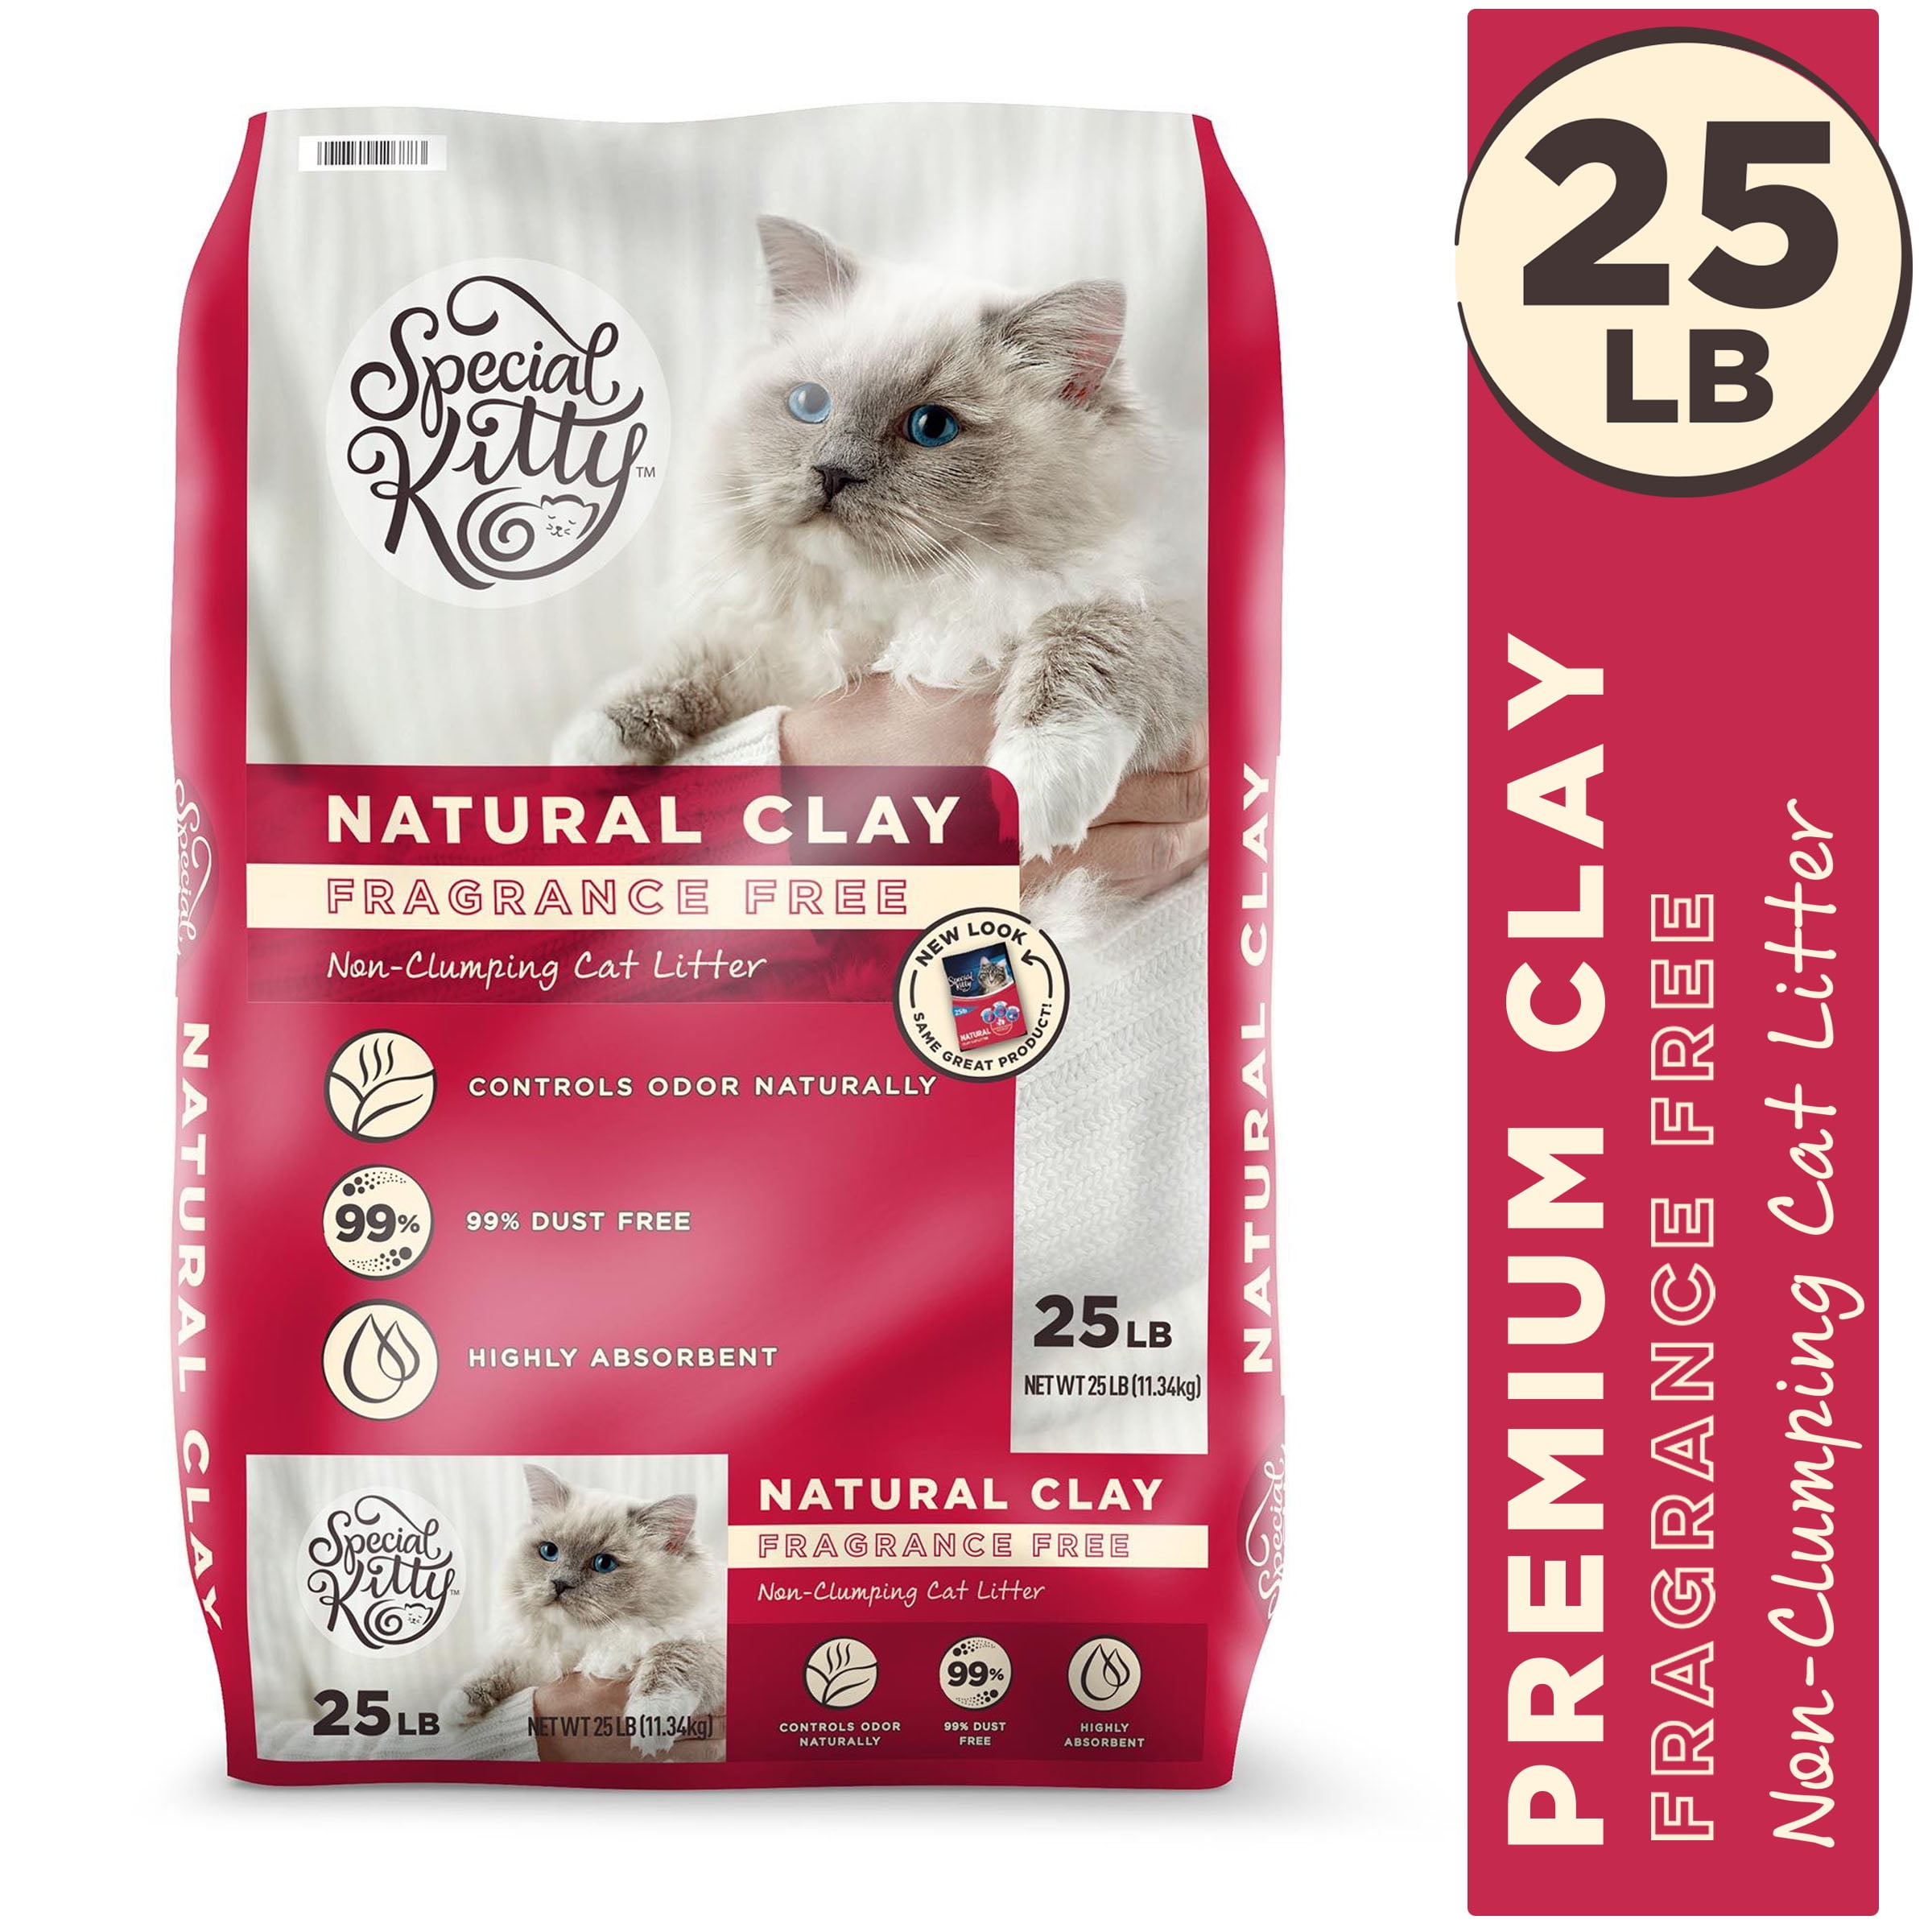 Special Kitty Fragrance Free Natural Clay NonClumping Cat Litter, 25